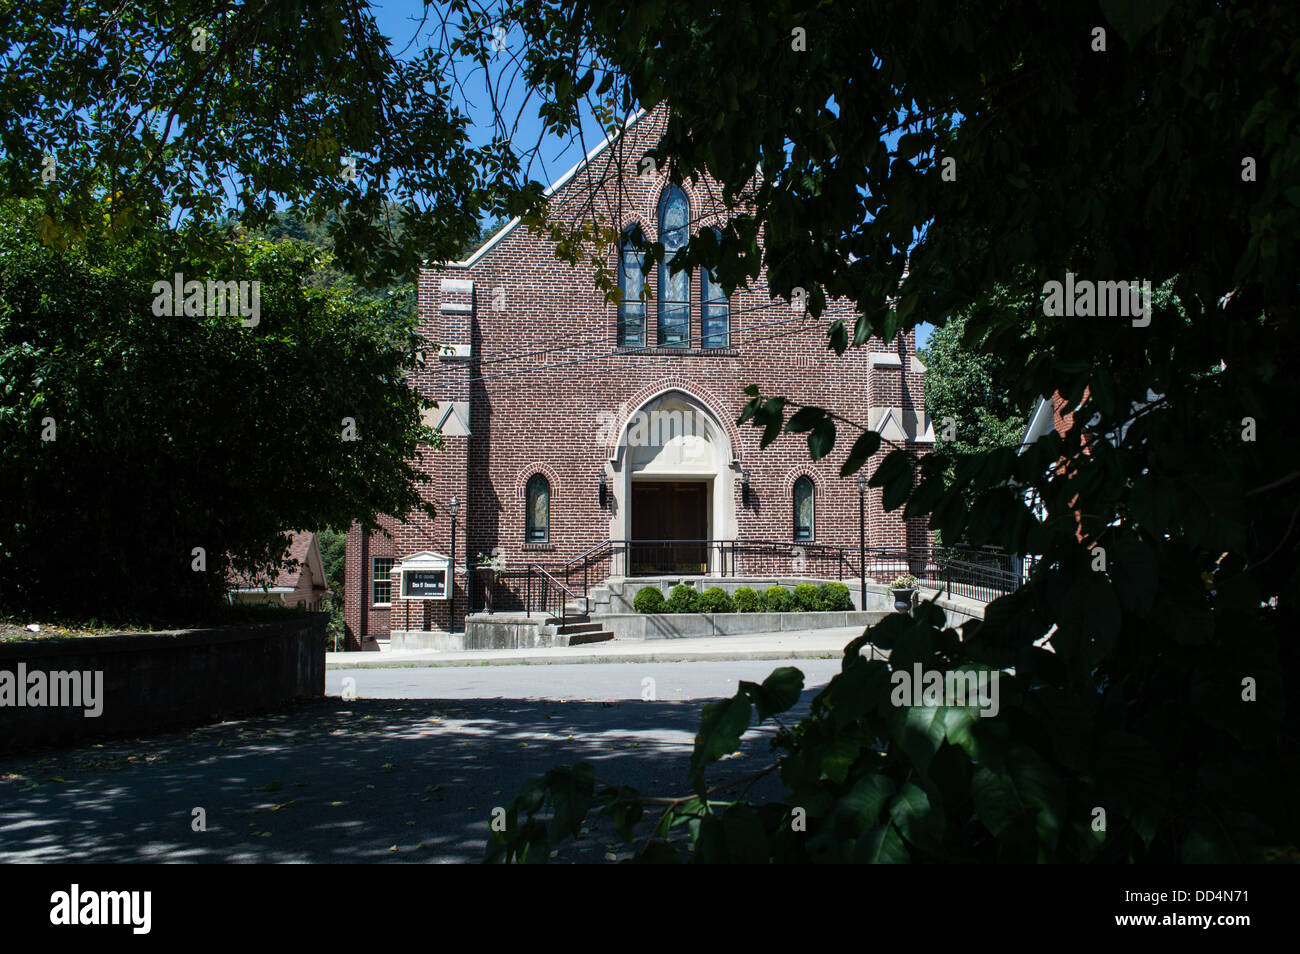 A brown brick church in a small town on a small street on a hilltop with trees framing the church. Stock Photo